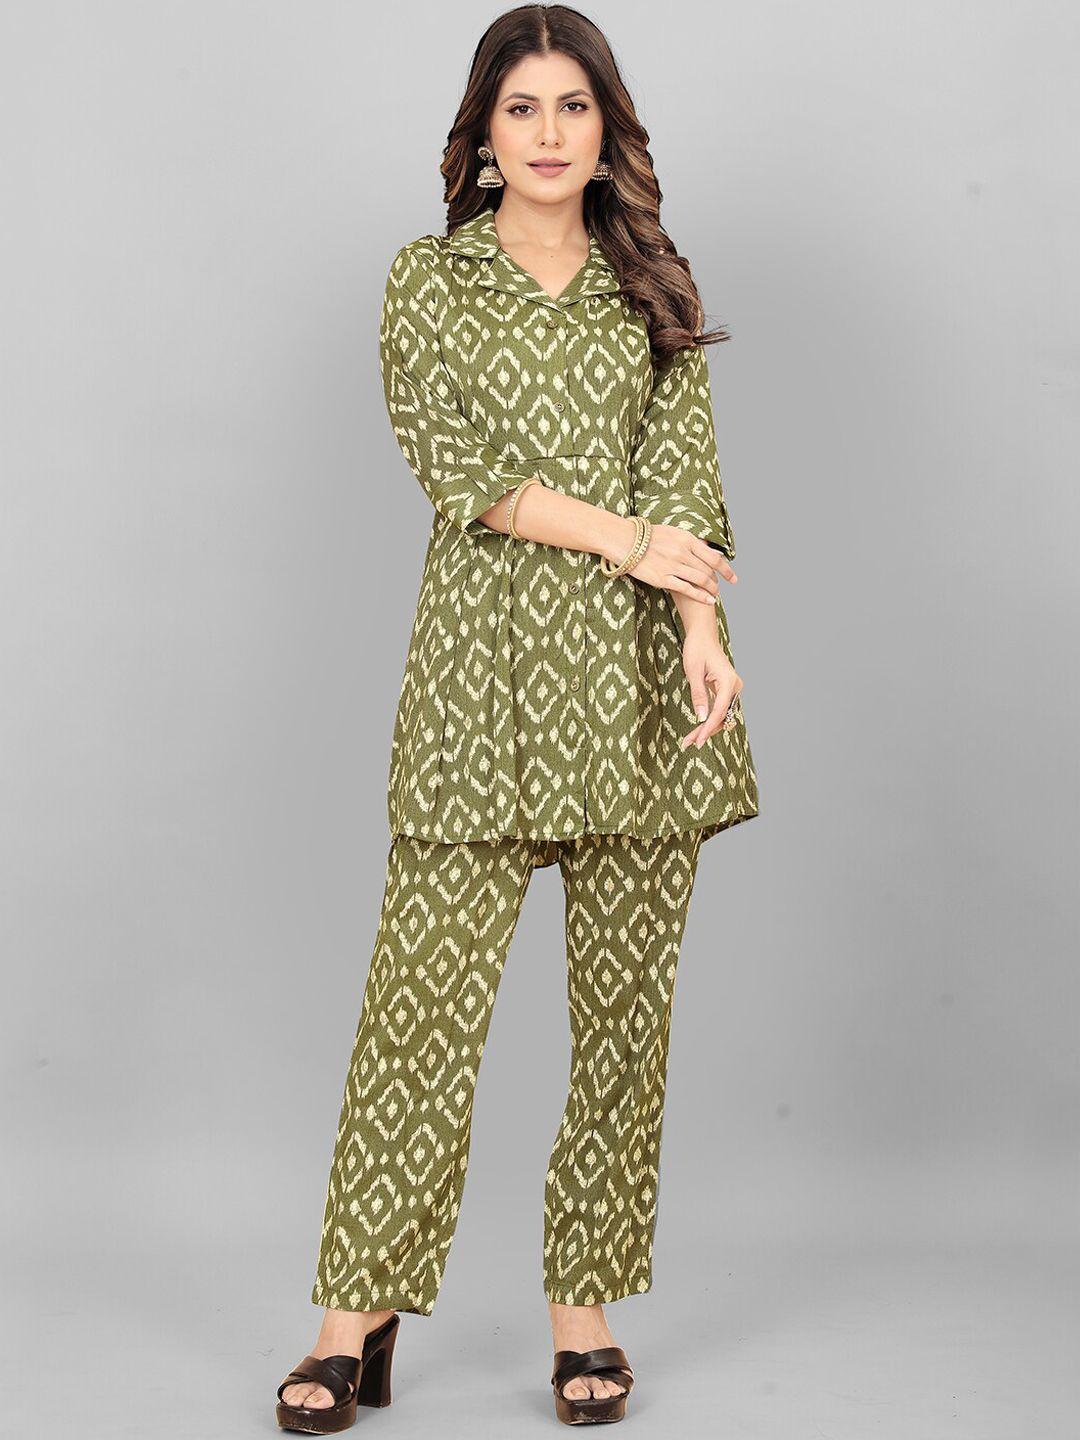 lilots printed button-front tunic & trousers co-ords